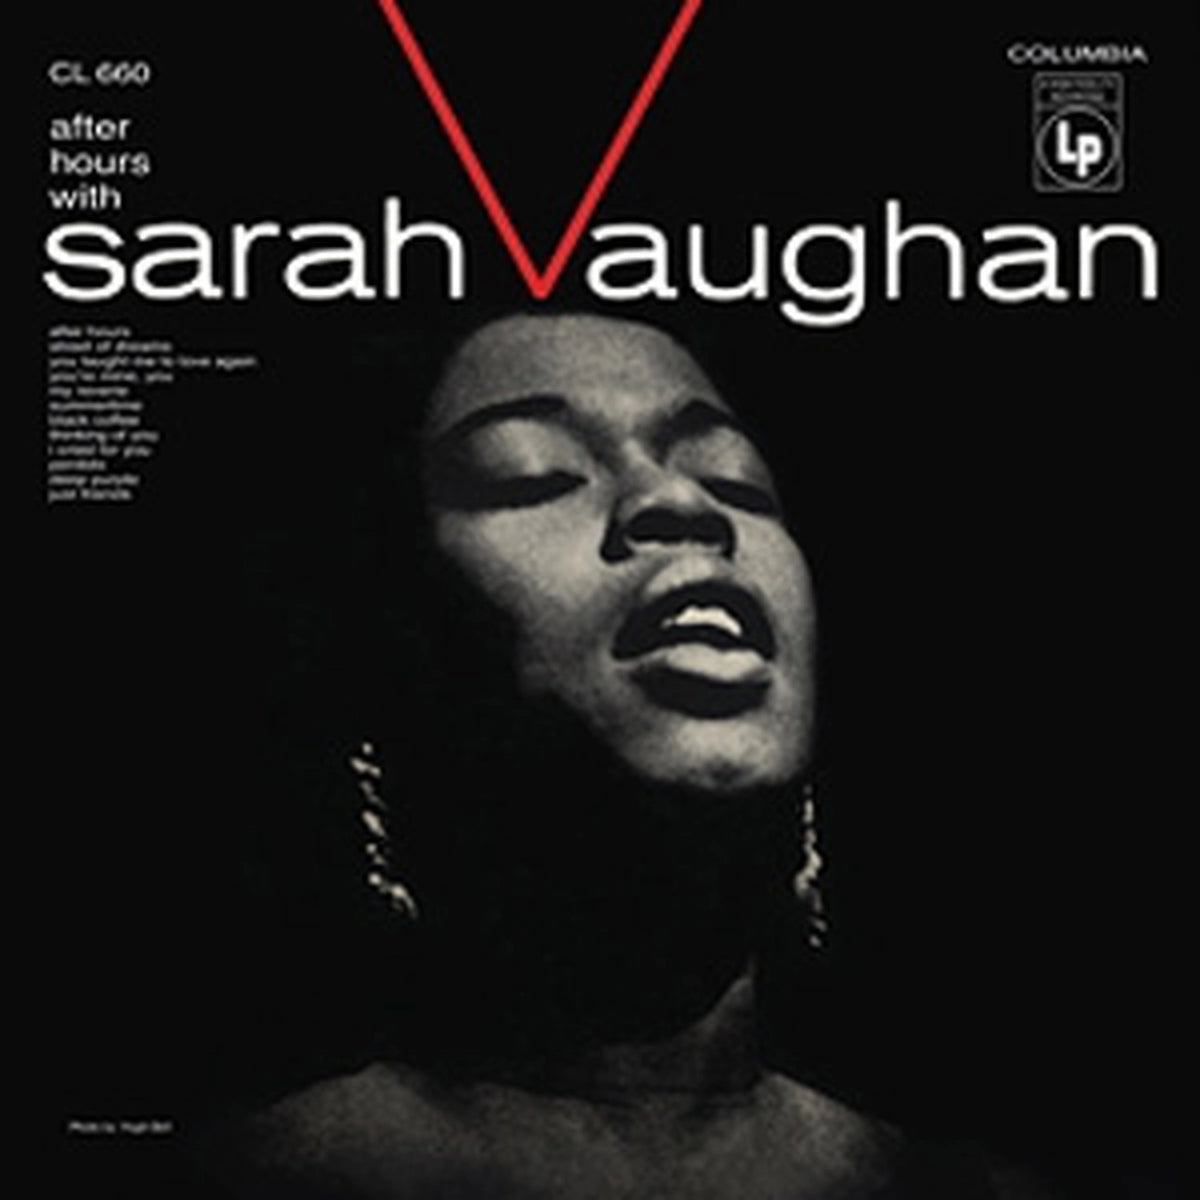 Sarah Vaughan - After Hours With LP (Remastered, Reissue, Mono, 180g)